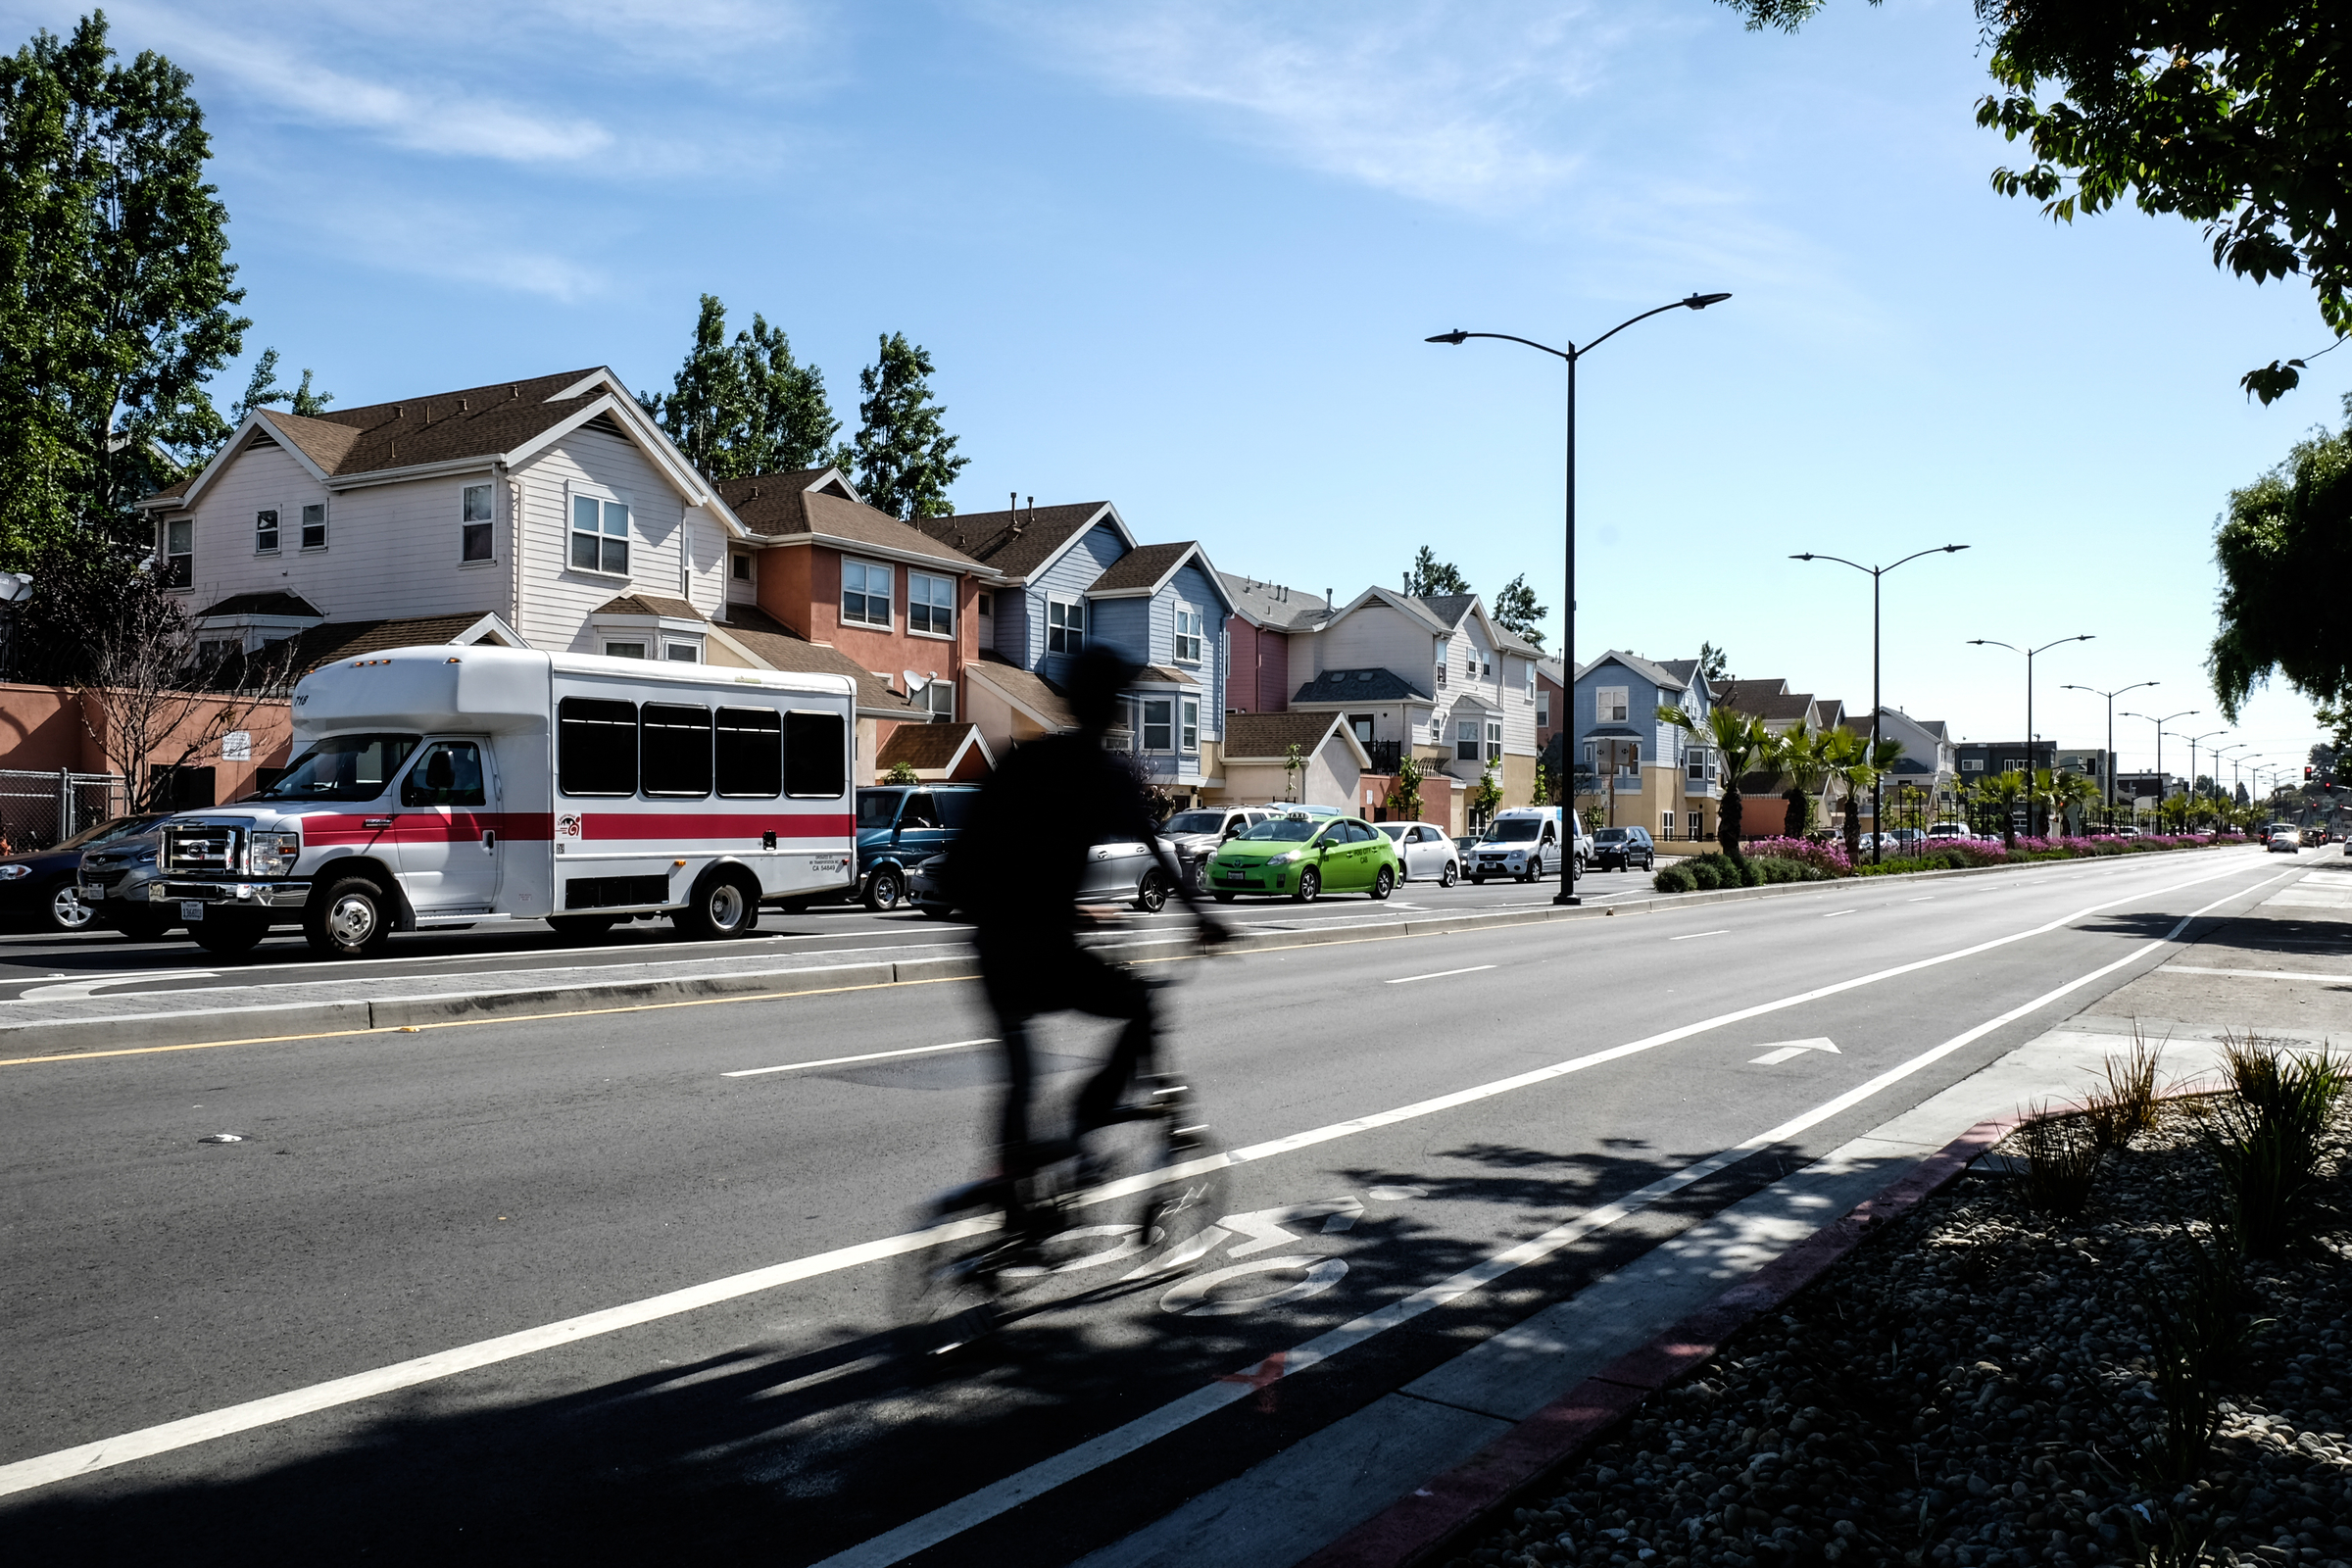 A bicyclist in shadow rides along the new Cesar Chavez street with traffic and houses in the background.